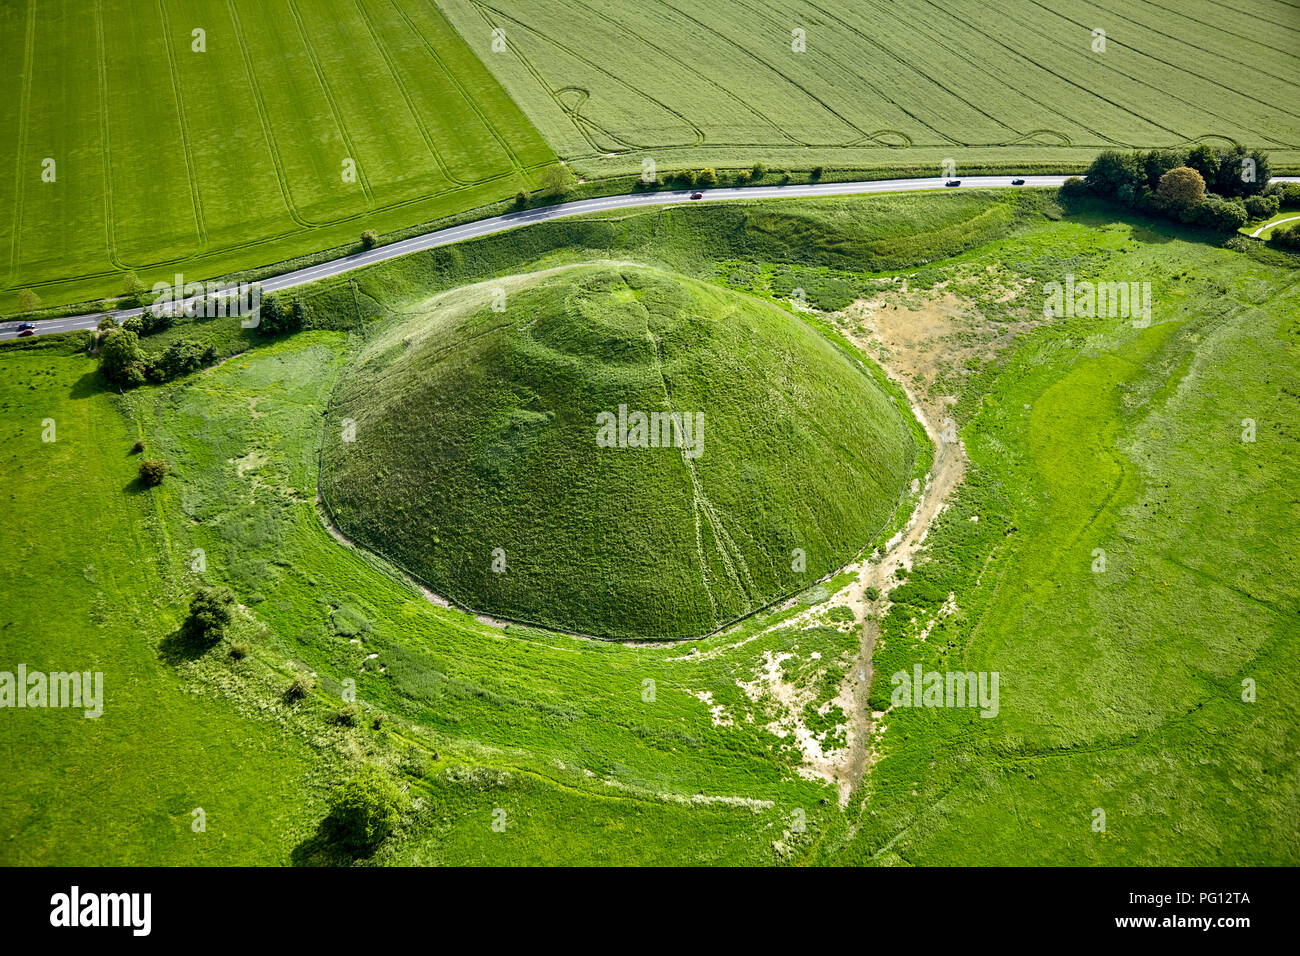 Magical Silbury Hill, Avebury - Why You Must Visit Wiltshire's Pyramid!